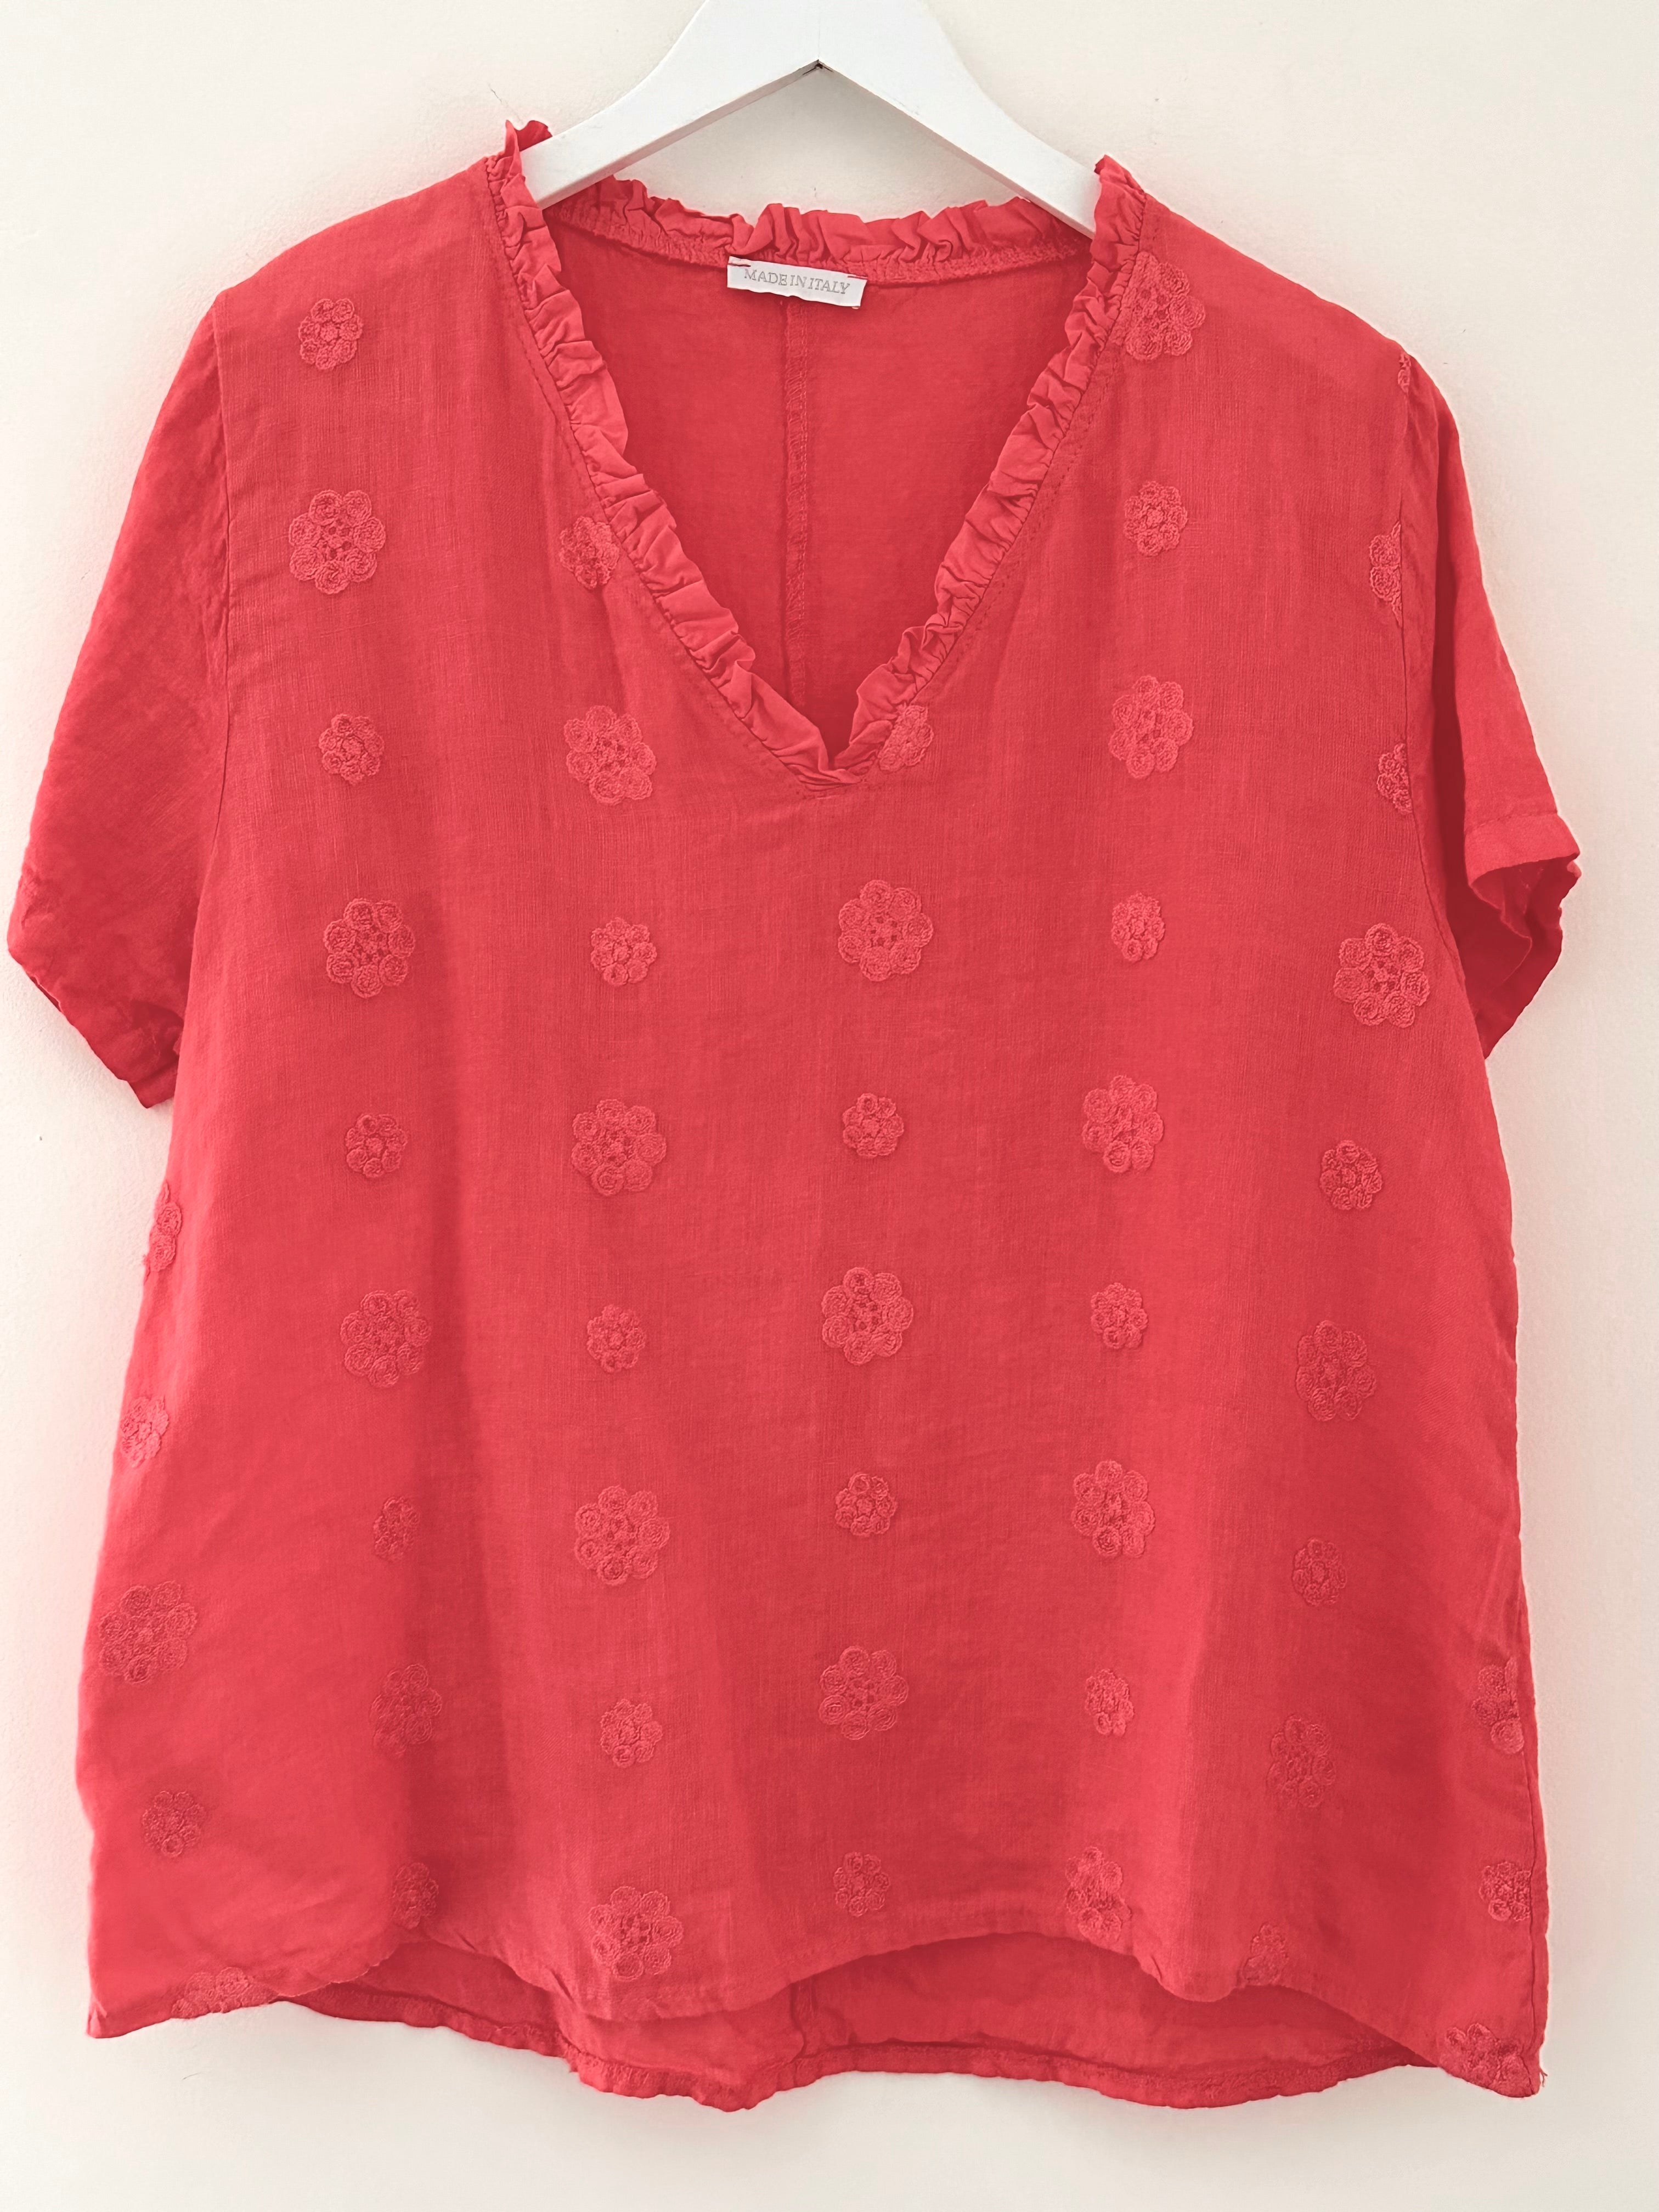 Linen Top with Embroidered Flowers in Coral